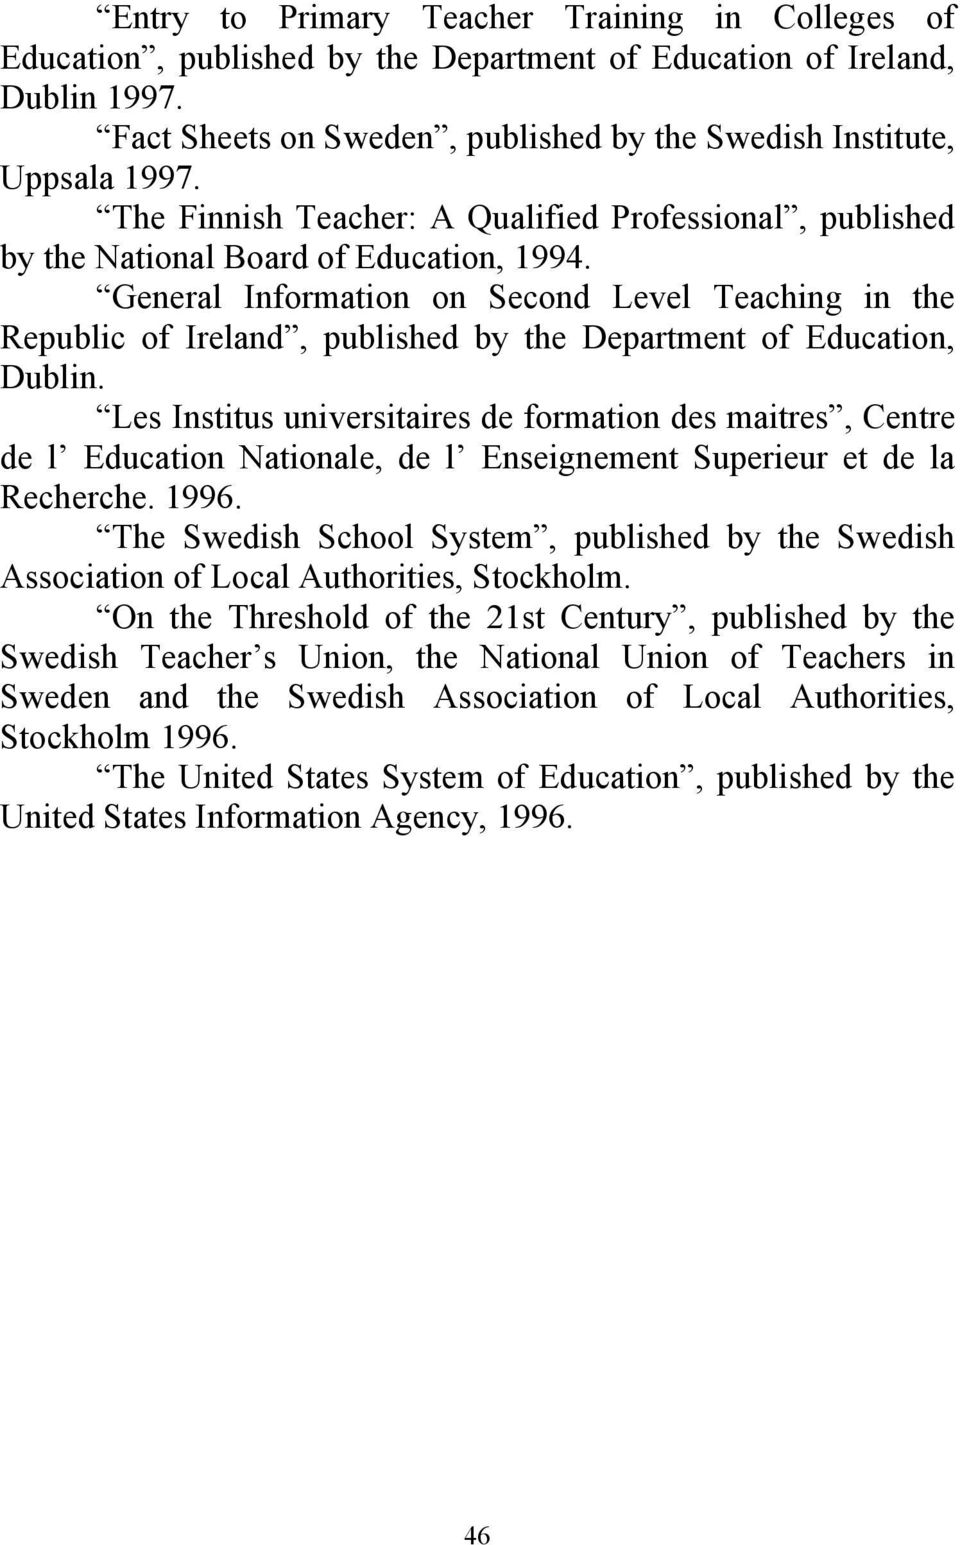 General Information on Second Level Teaching in the Republic of Ireland, published by the Department of Education, Dublin.